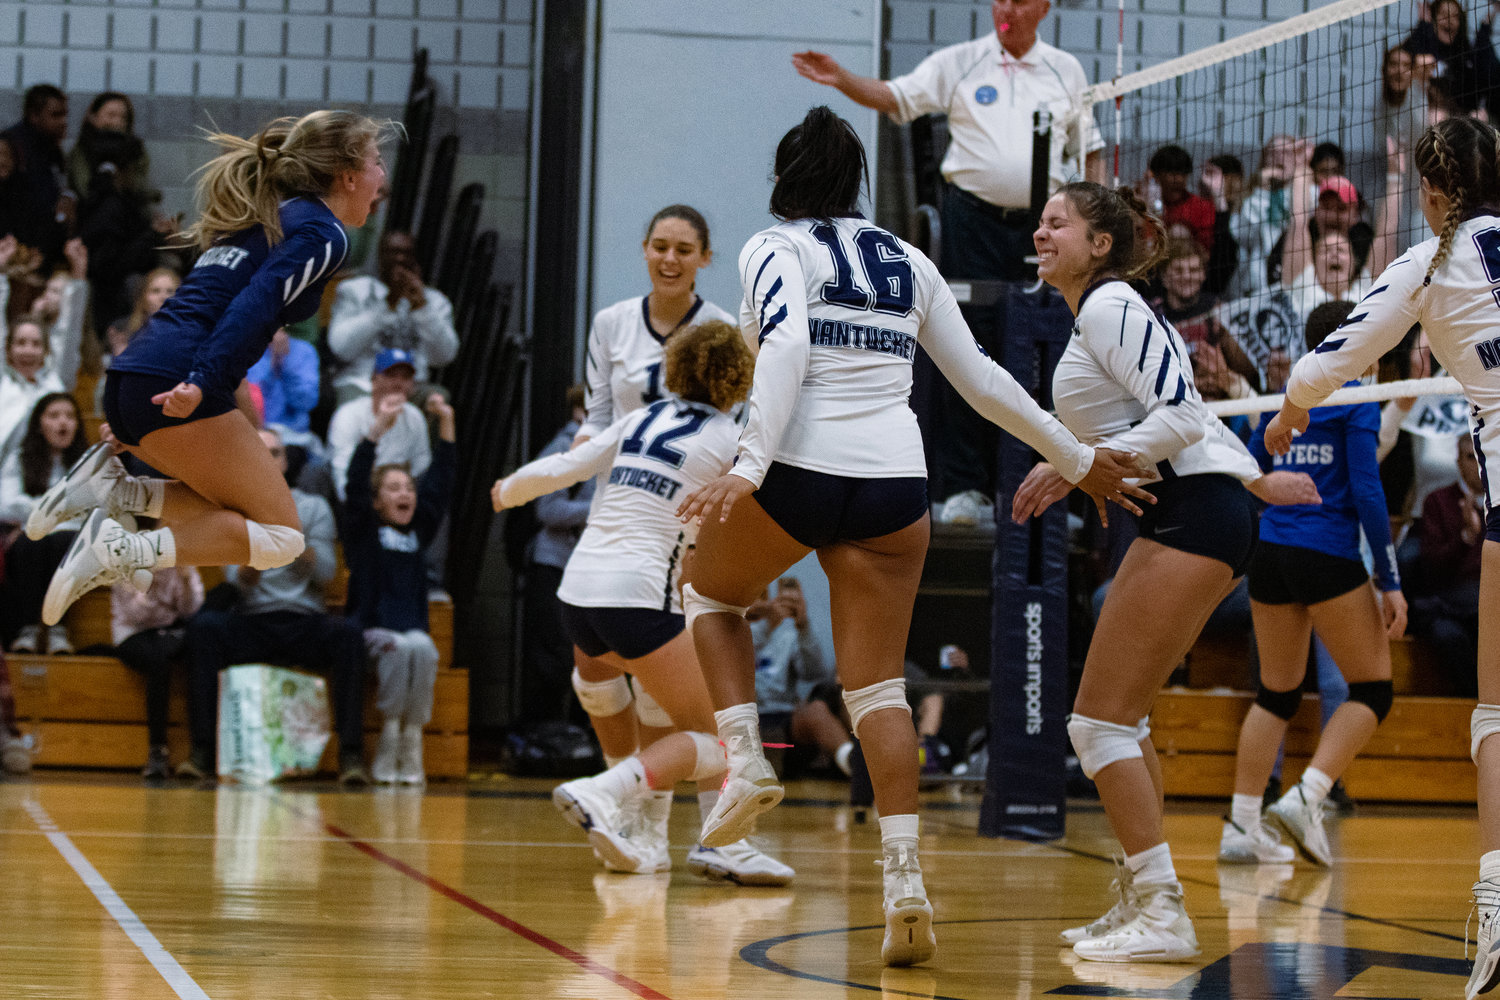 The girls jump in celebration after a huge kill by Kacey Riseborough.